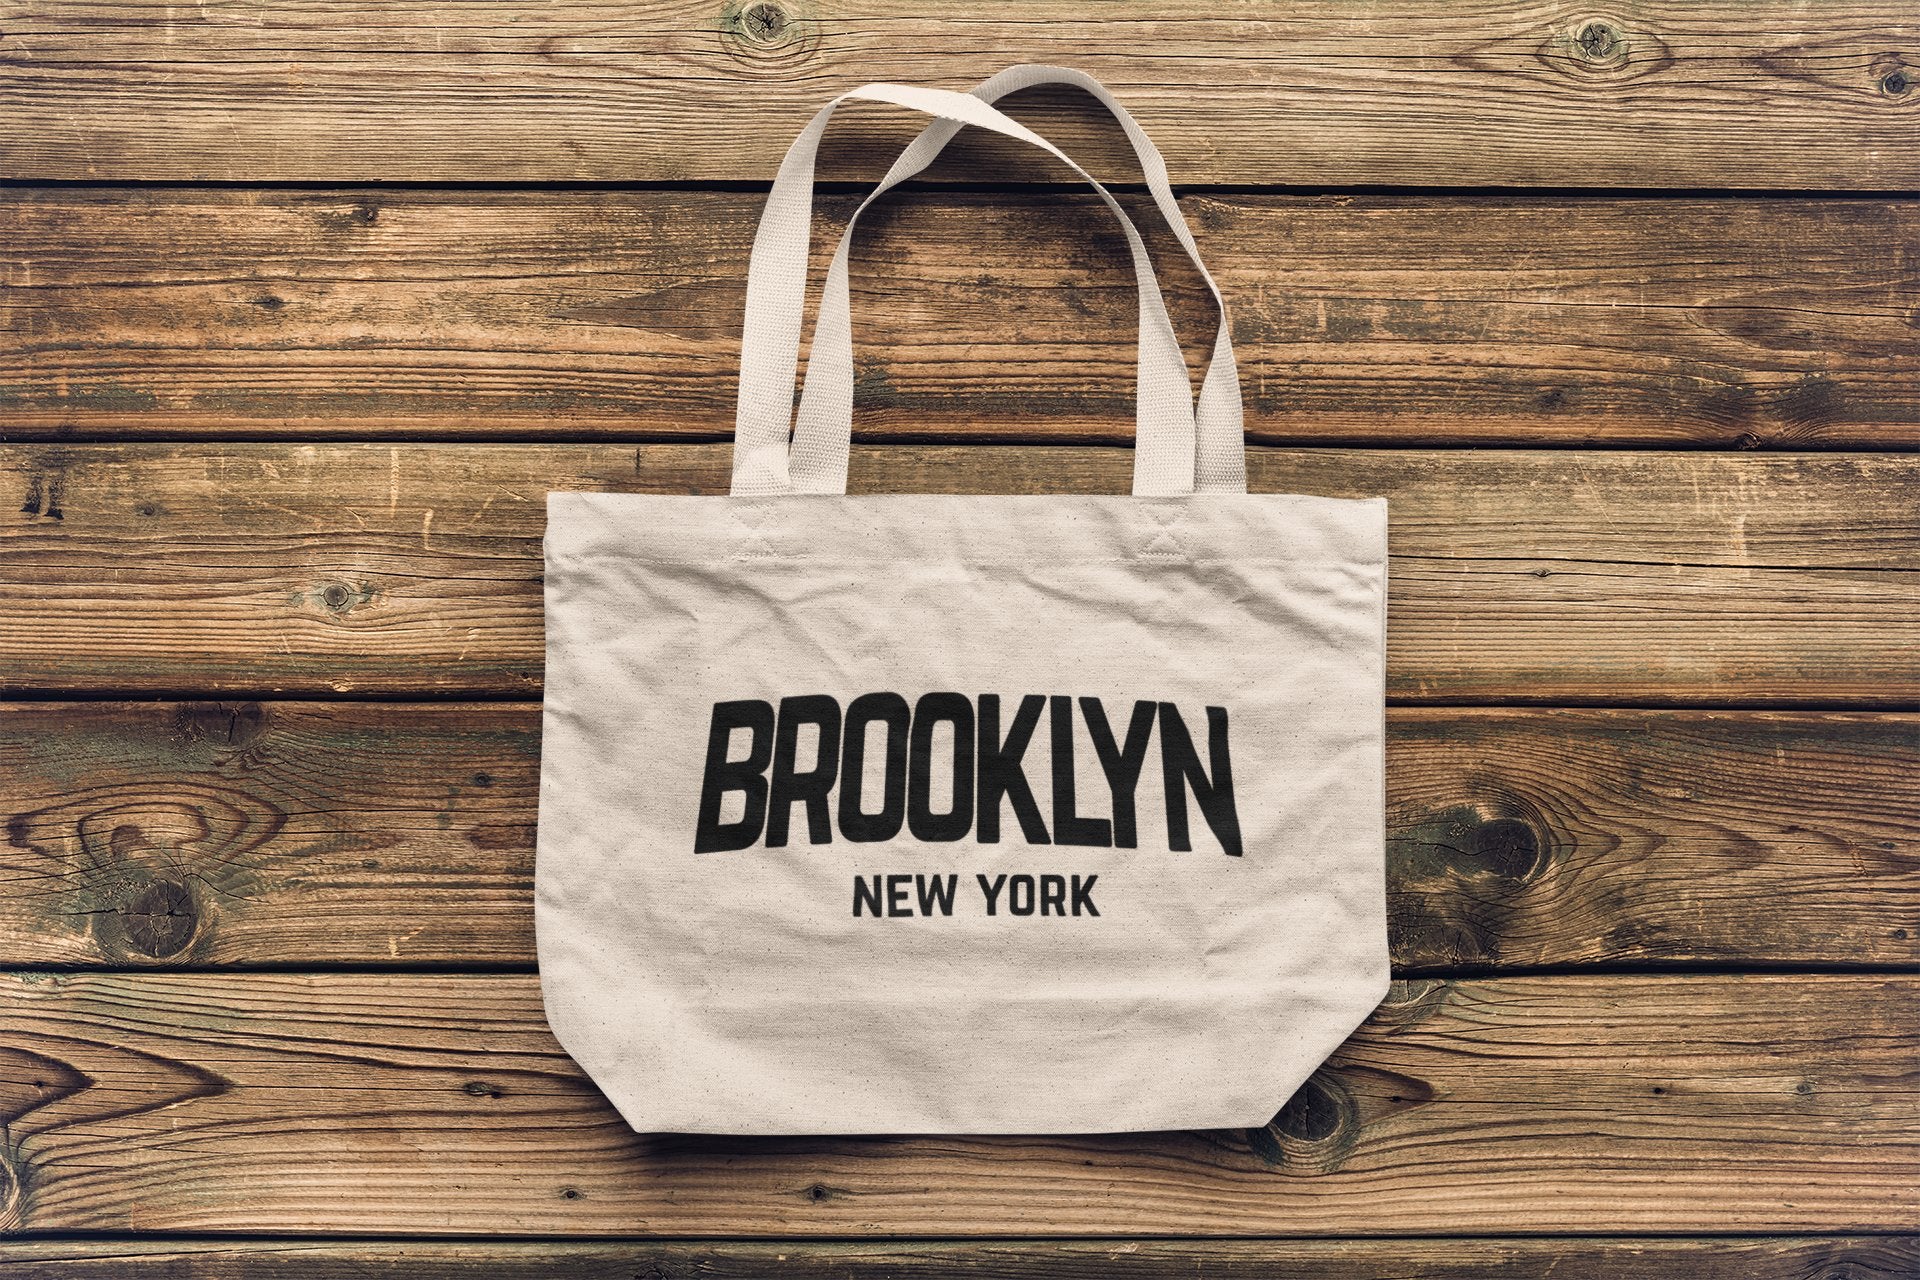 Brooklyn - Jumbo Size Vintage Style Retro City Cotton Canvas Tote Bags